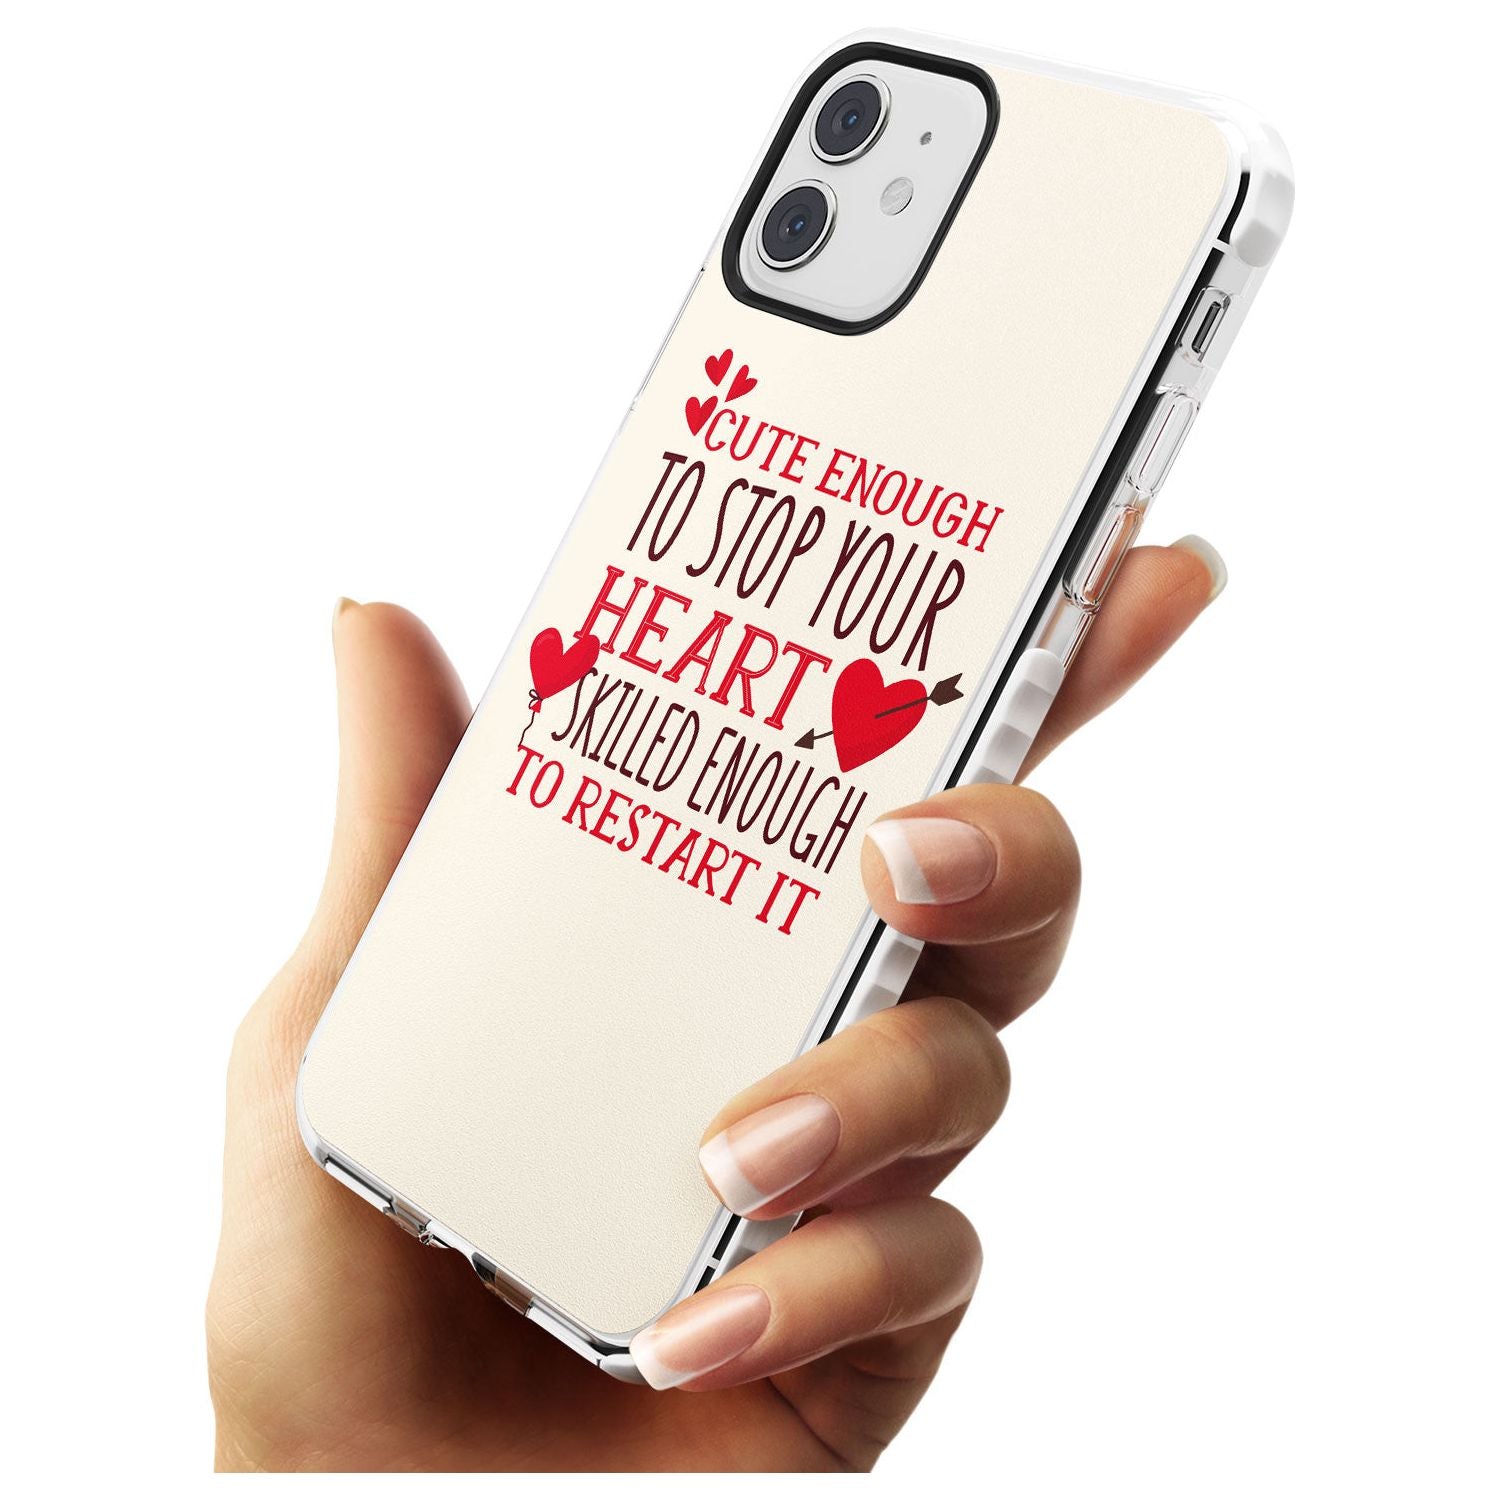 Medical Design Cute Enough to Stop Your Heart Impact Phone Case for iPhone 11